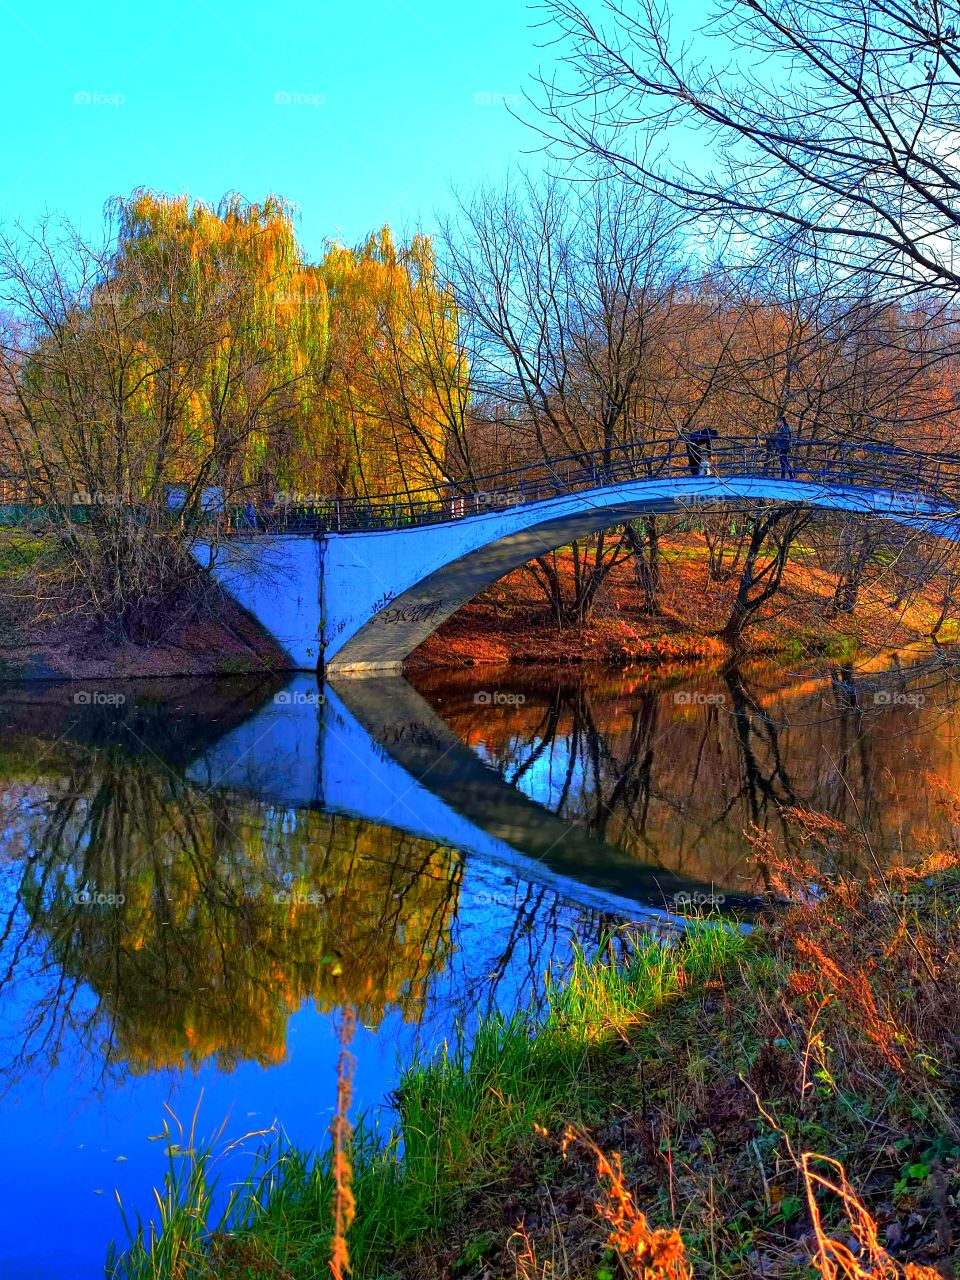 Reflection.  Bridge over the river.  Reflection in the blue water of the bridge and autumn trees